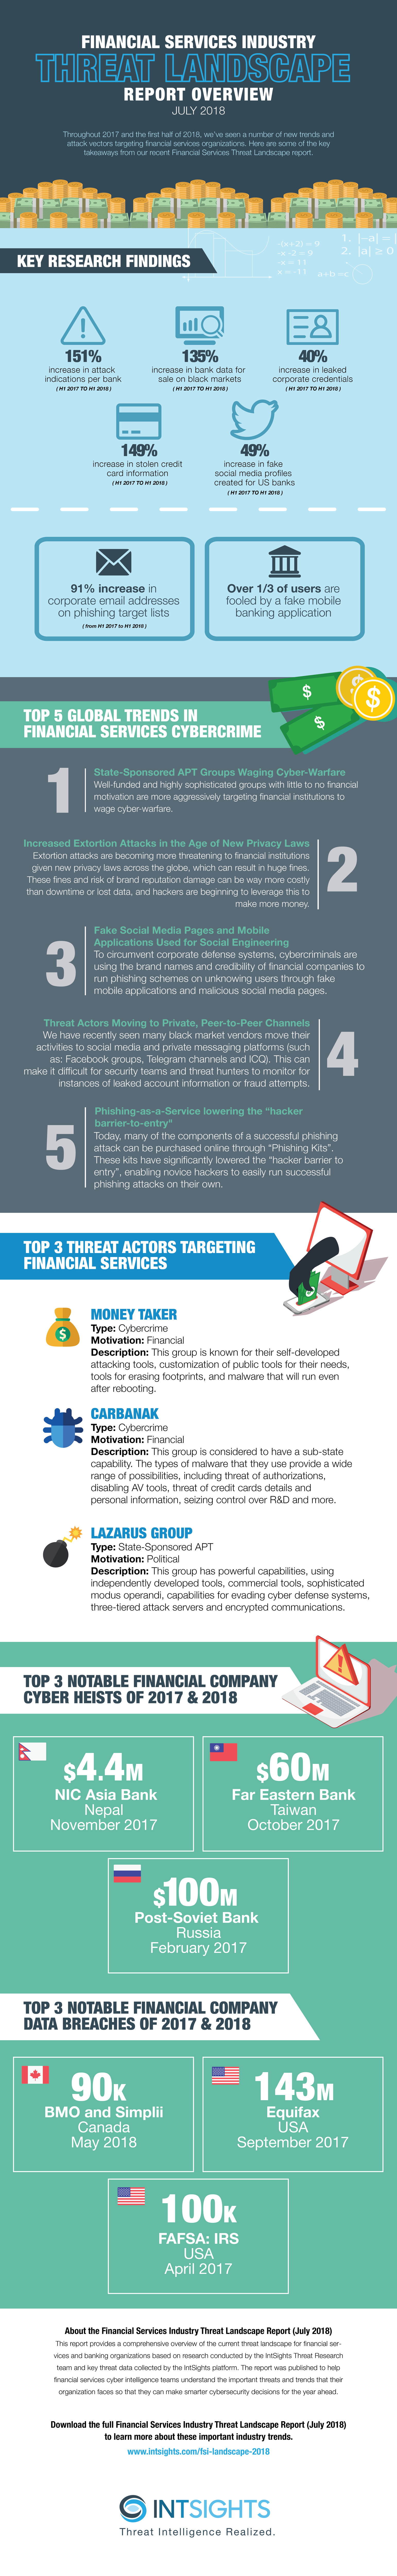 Financial Server Cybersecurity Threats infographic